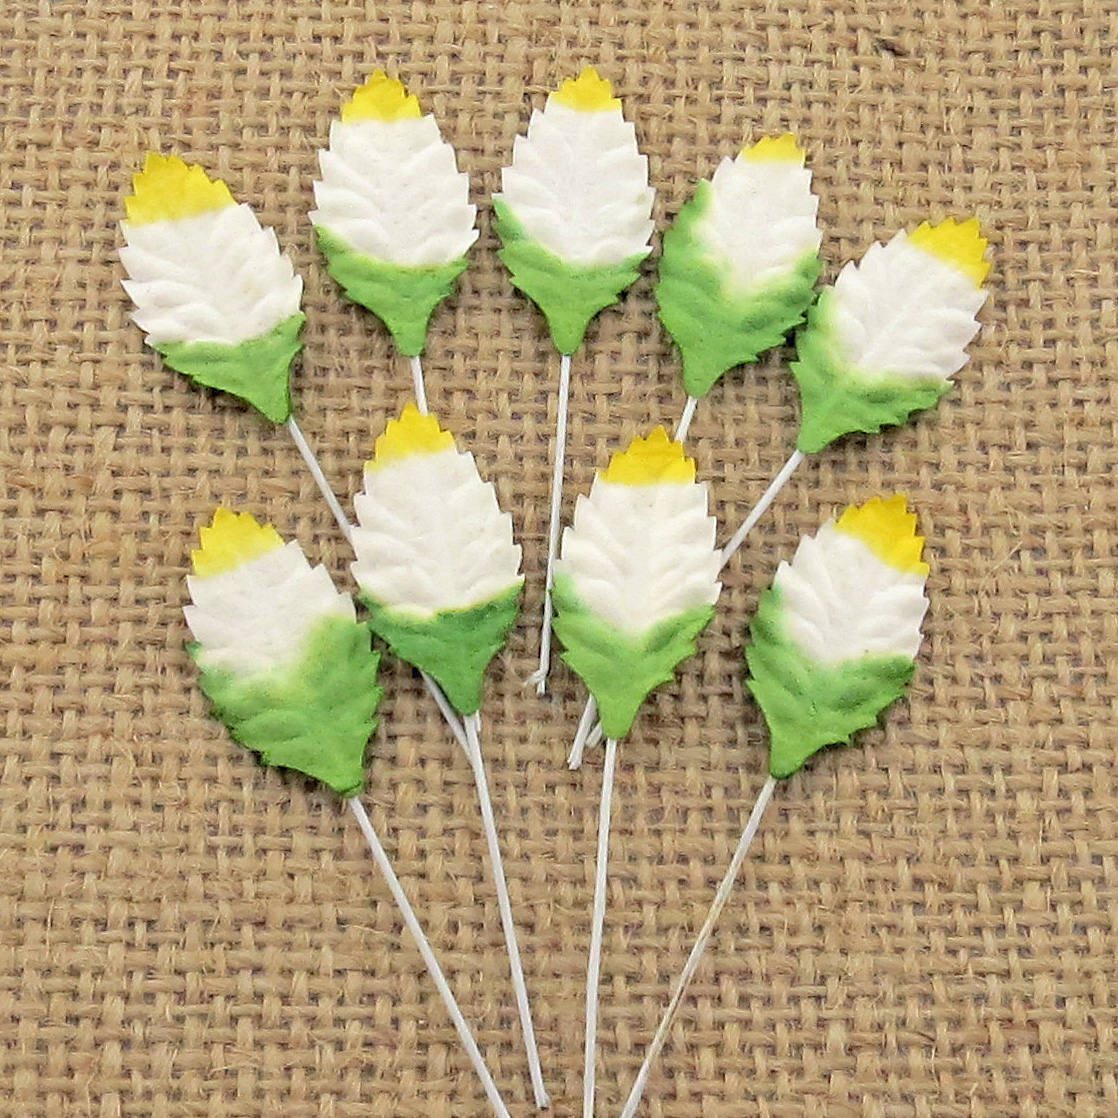 100 2-tone green/white/yellow Mulberry Paper Leaves - 25mm